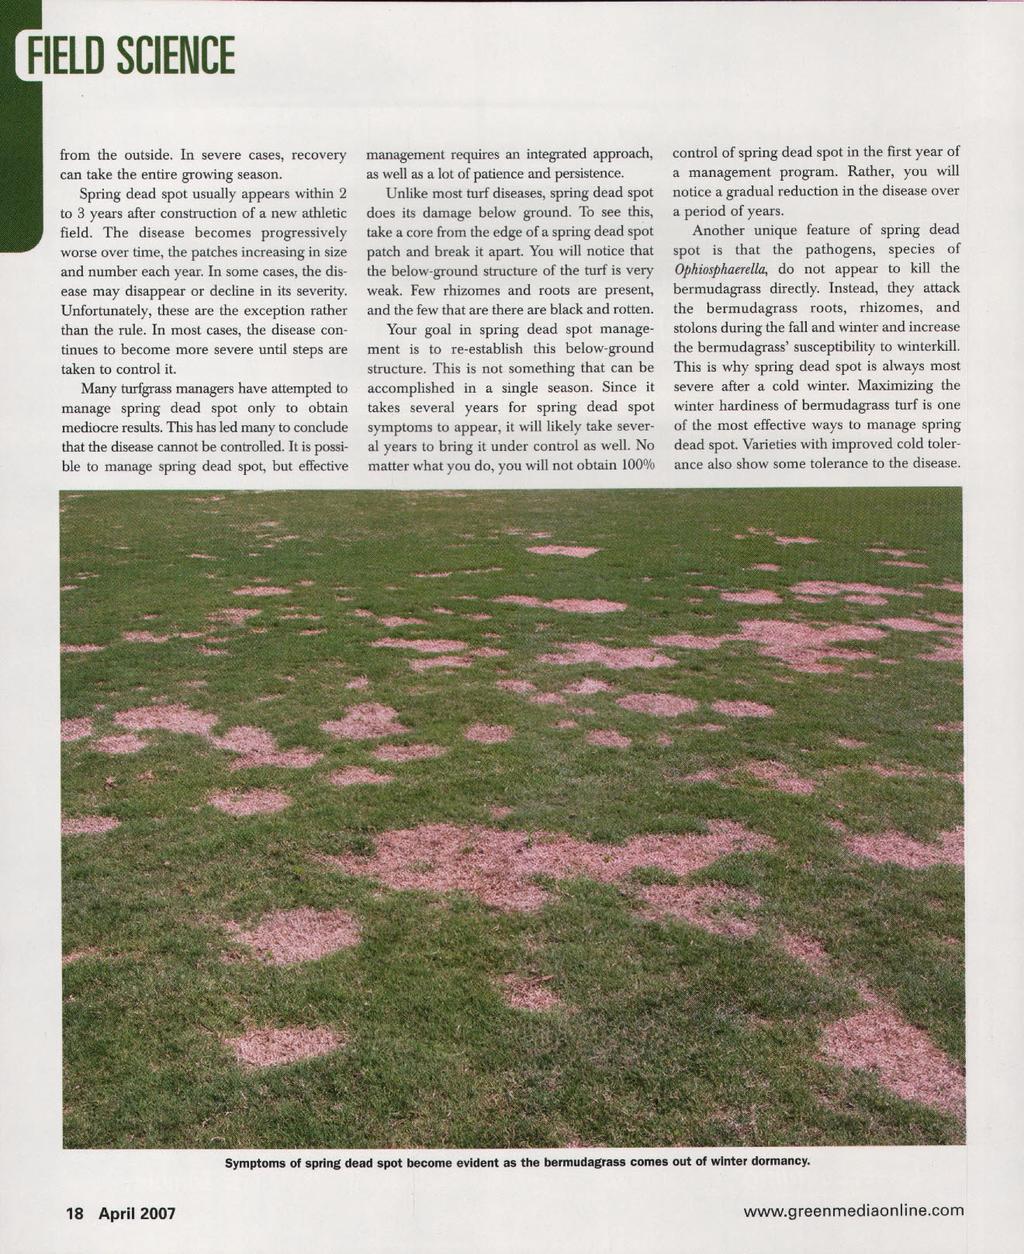 from the outside. In severe cases, recovery can take the entire growing season. Spring dead spot usually appears within 2 to 3 years after construction of a new athletic field.